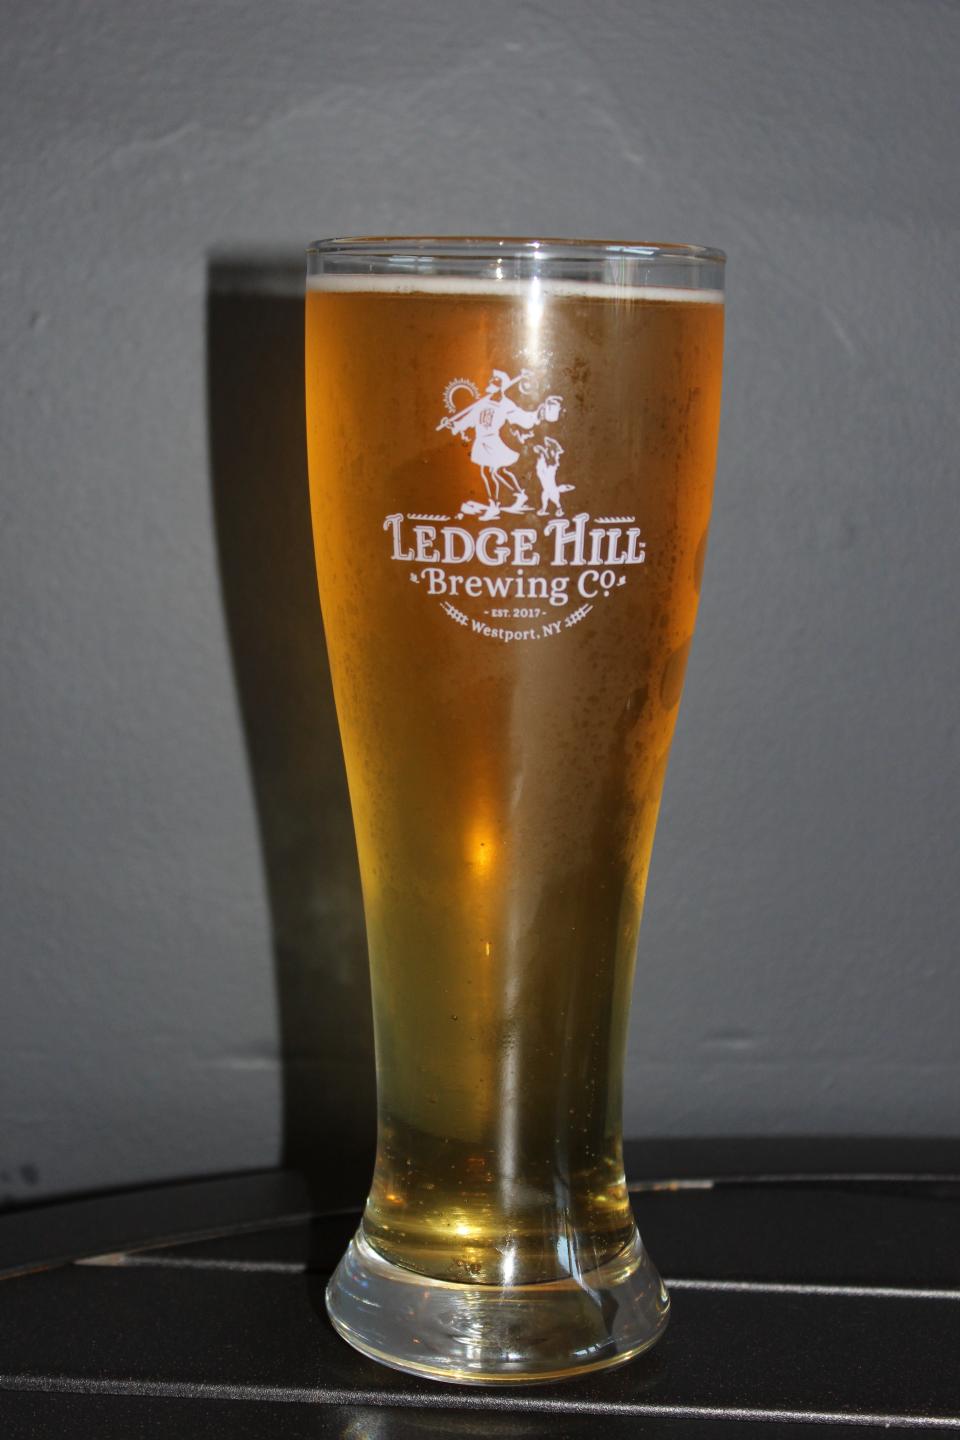 A tall, frosty glass of beer that reads "Ledge Hill Brewing Co." on it.